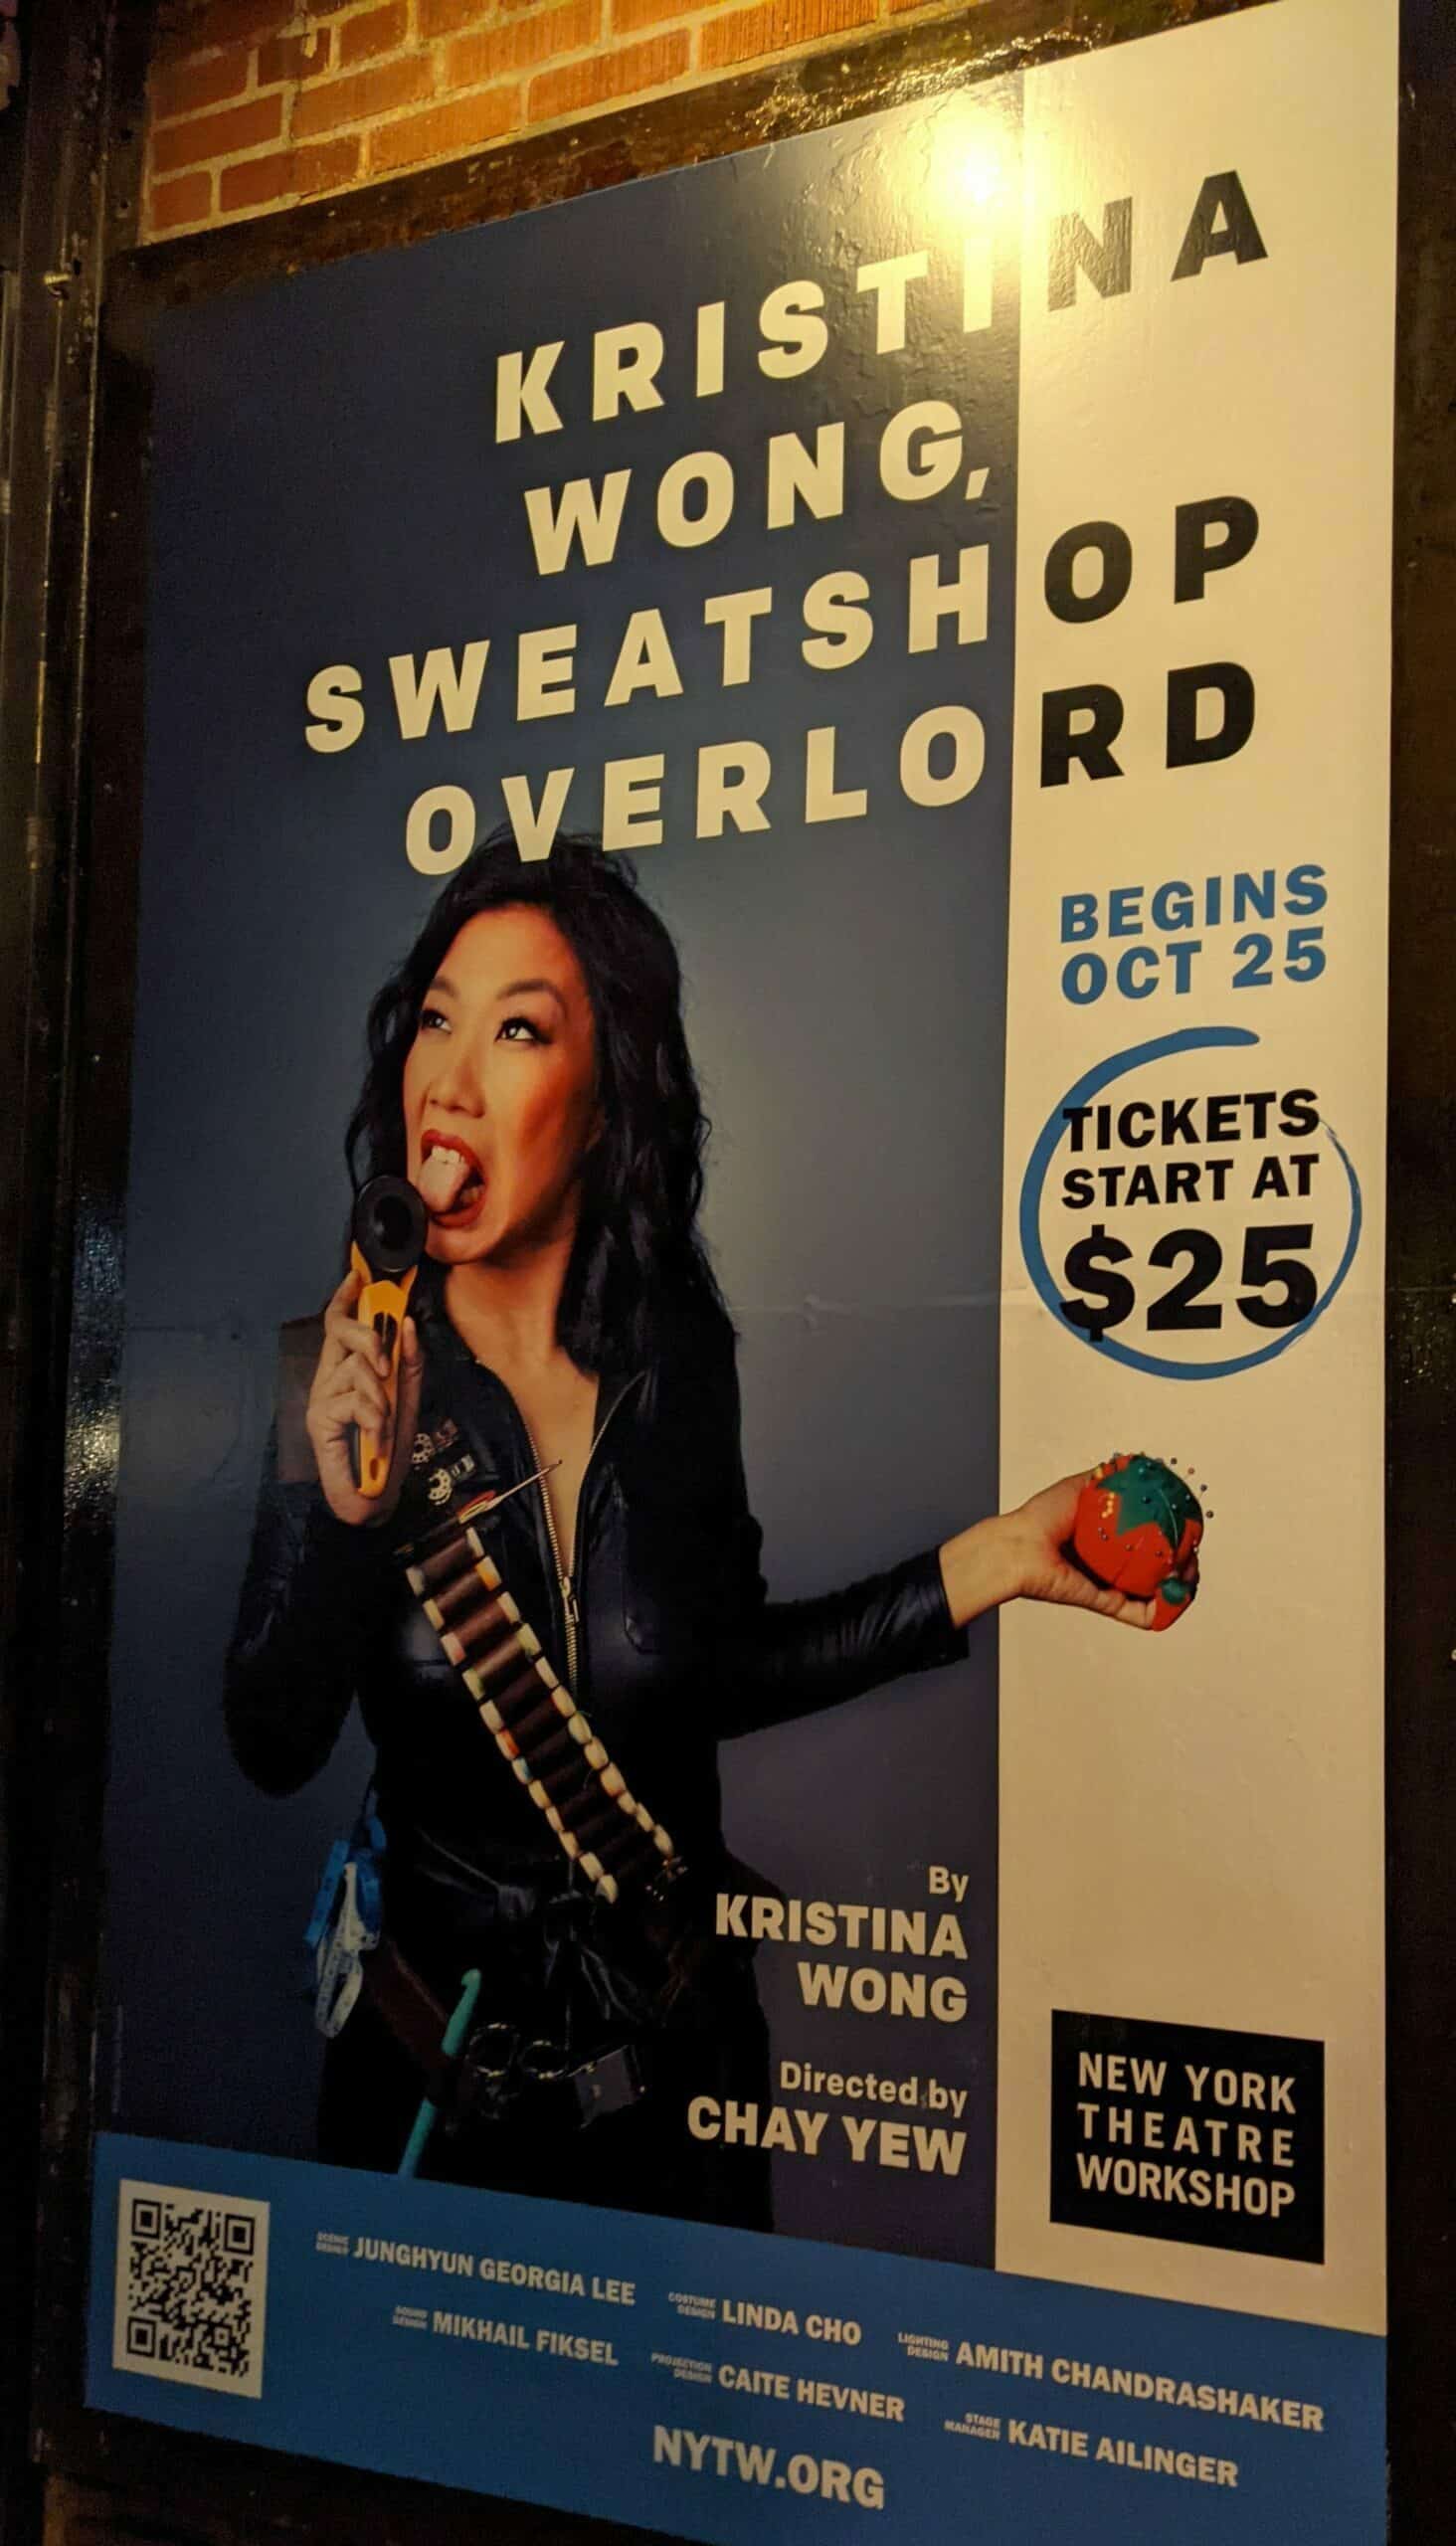 Kristina Wong: Sweatshop Overlord – Overview/ Review (with Spoilers)